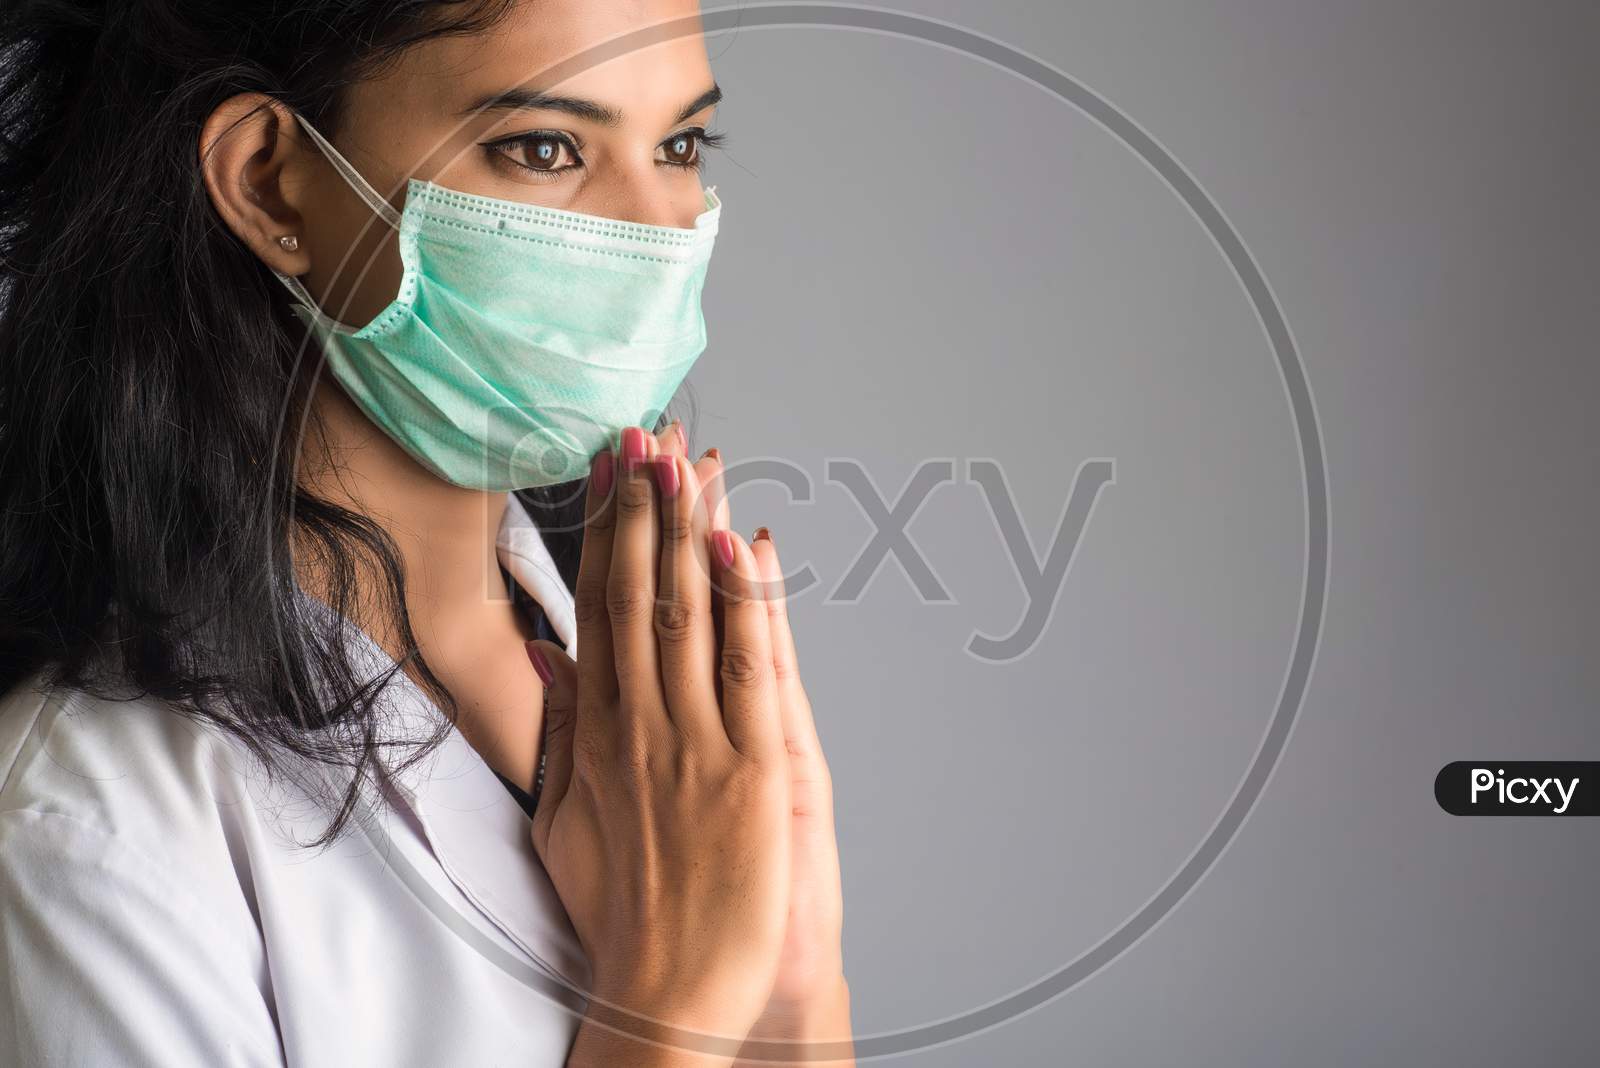 Young Woman Doctor Doing Namaste Because Of Outbreak Of Covid-19. New Greeting To Avoid The Spread Of Coronavirus Instead Of Greeting With A Hug Or Handshake.